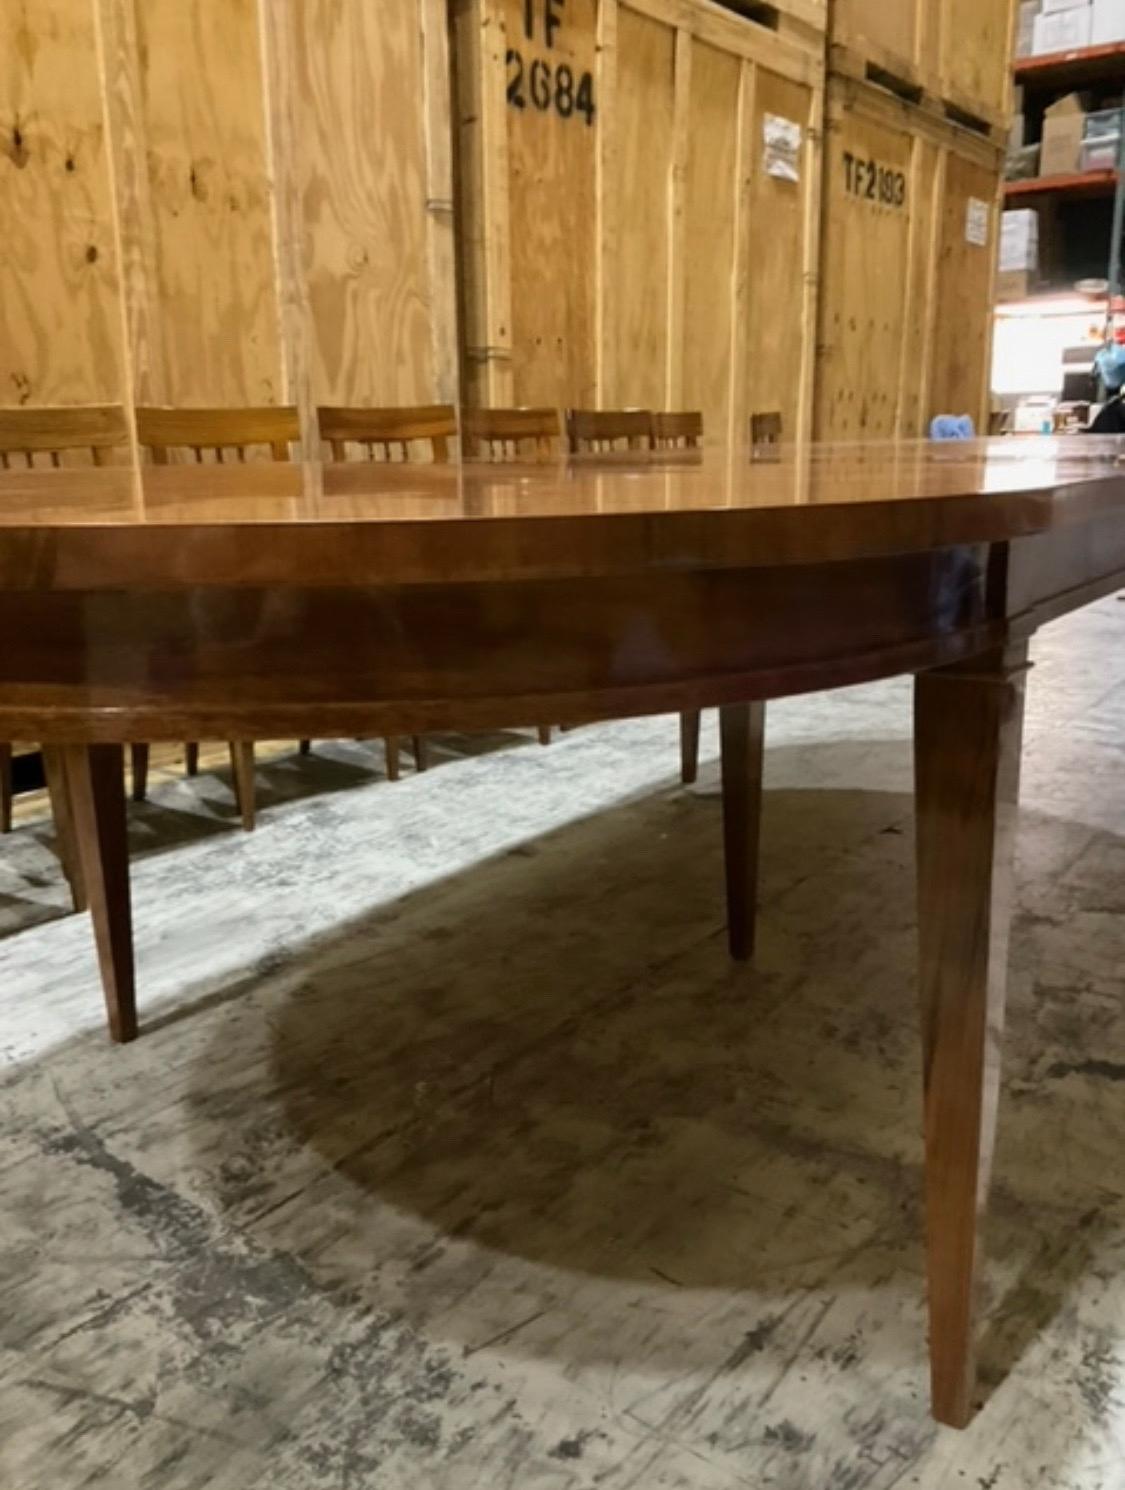 20th century Biedermeier style walnut dining table Handmade by fine Biedermeier dealer Alois Hummel from Germany. Walnut with lighter inlay banding on top, tapered straight legs. A very high quality Biedermeier reproduction fabricated by Alois